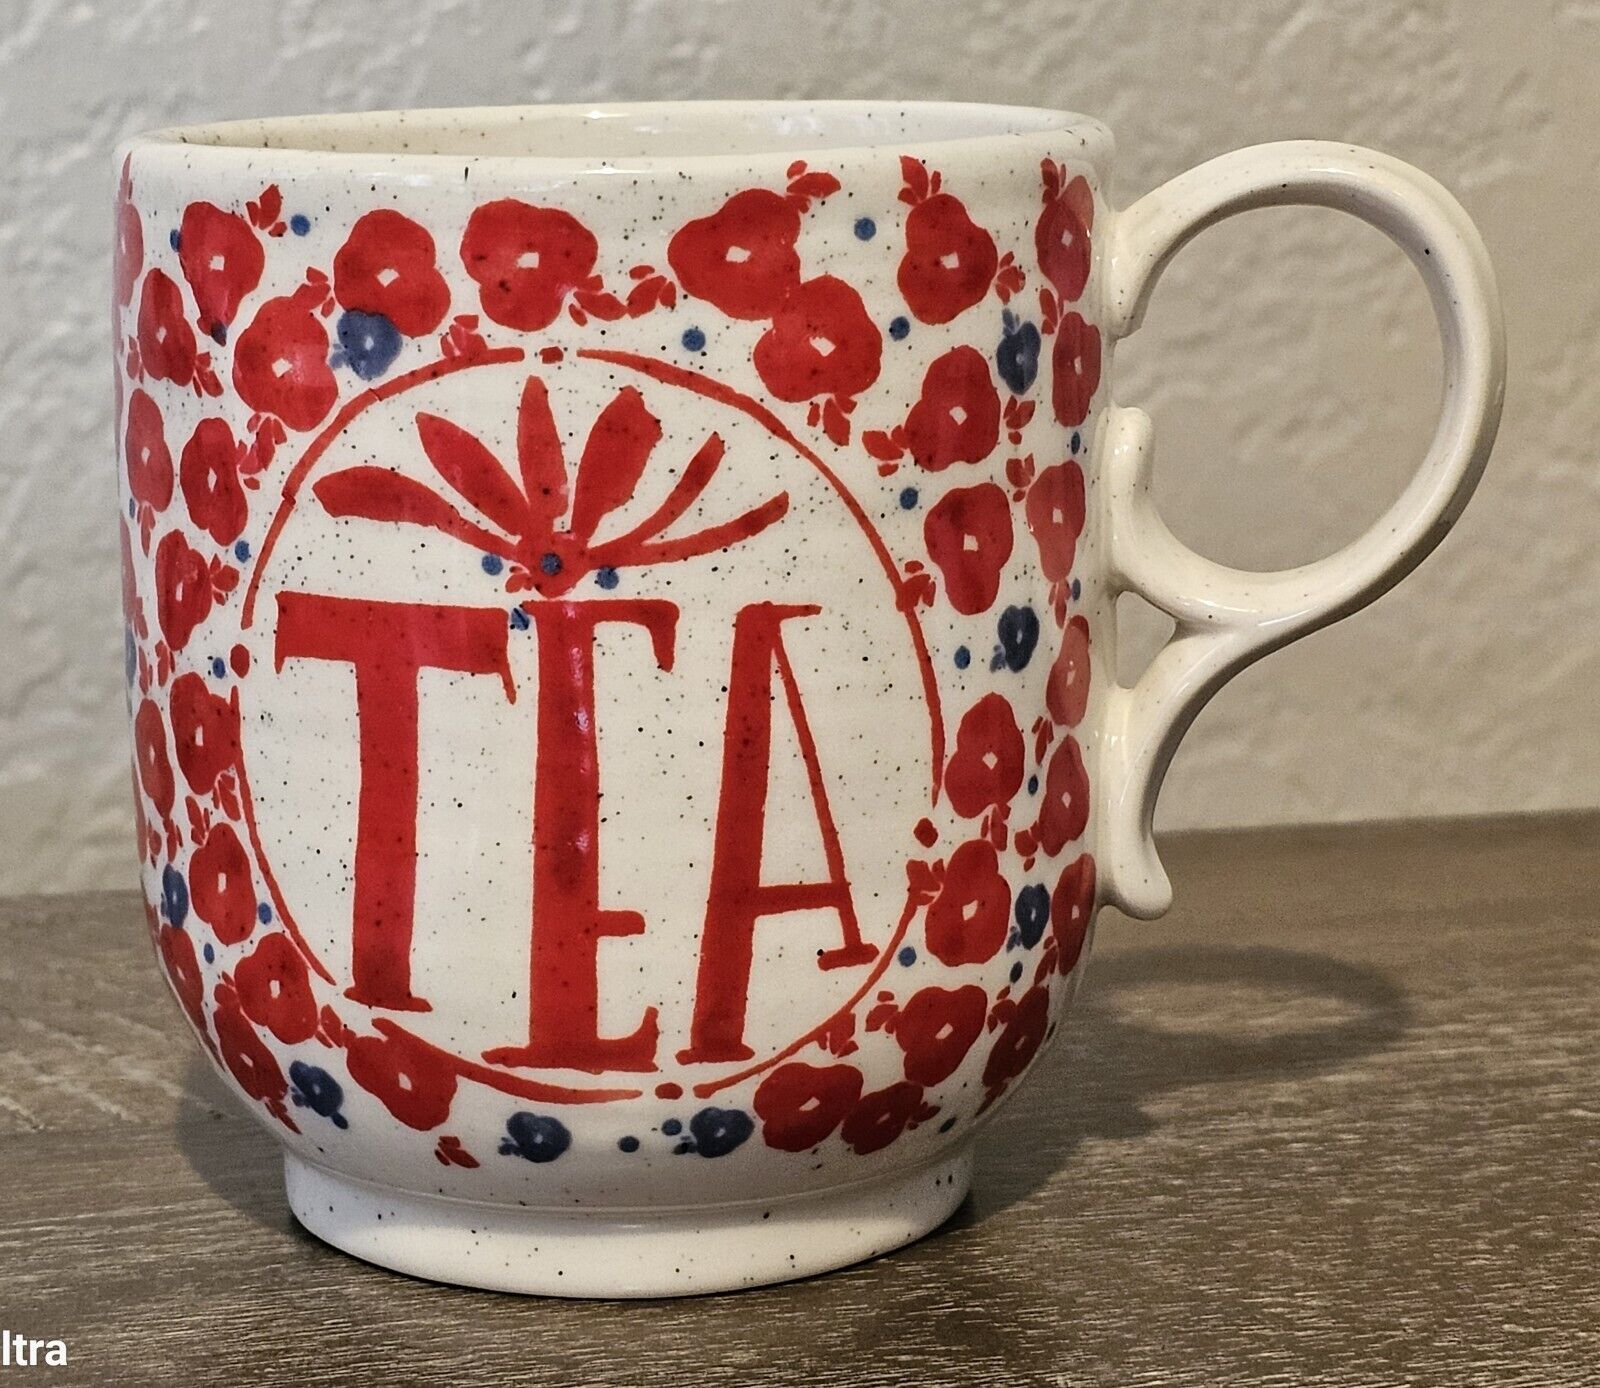 ANTHROPOLOGIE ELEVENSES RED FLORAL POPPY TEA COFFEE MUG CUP